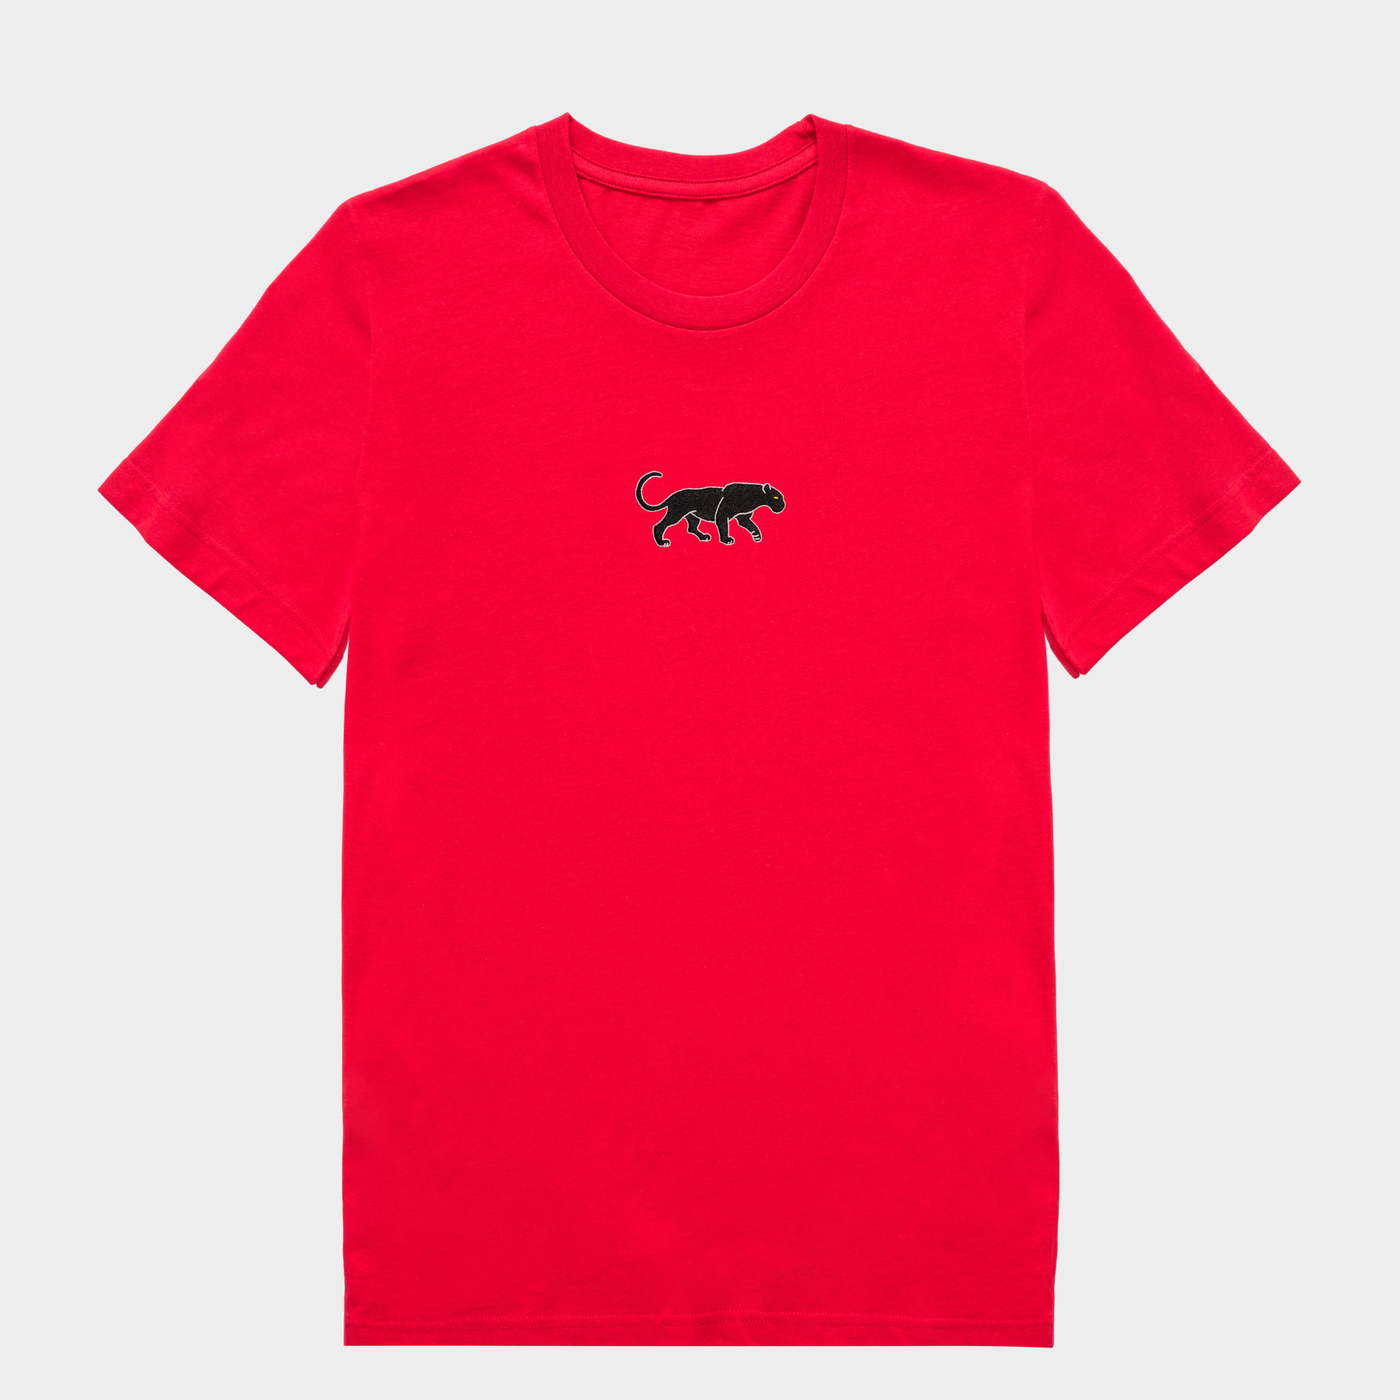 Bobby's Planet Men's Embroidered Black Jaguar T-Shirt from South American Amazon Animals Collection in Red Color#color_red